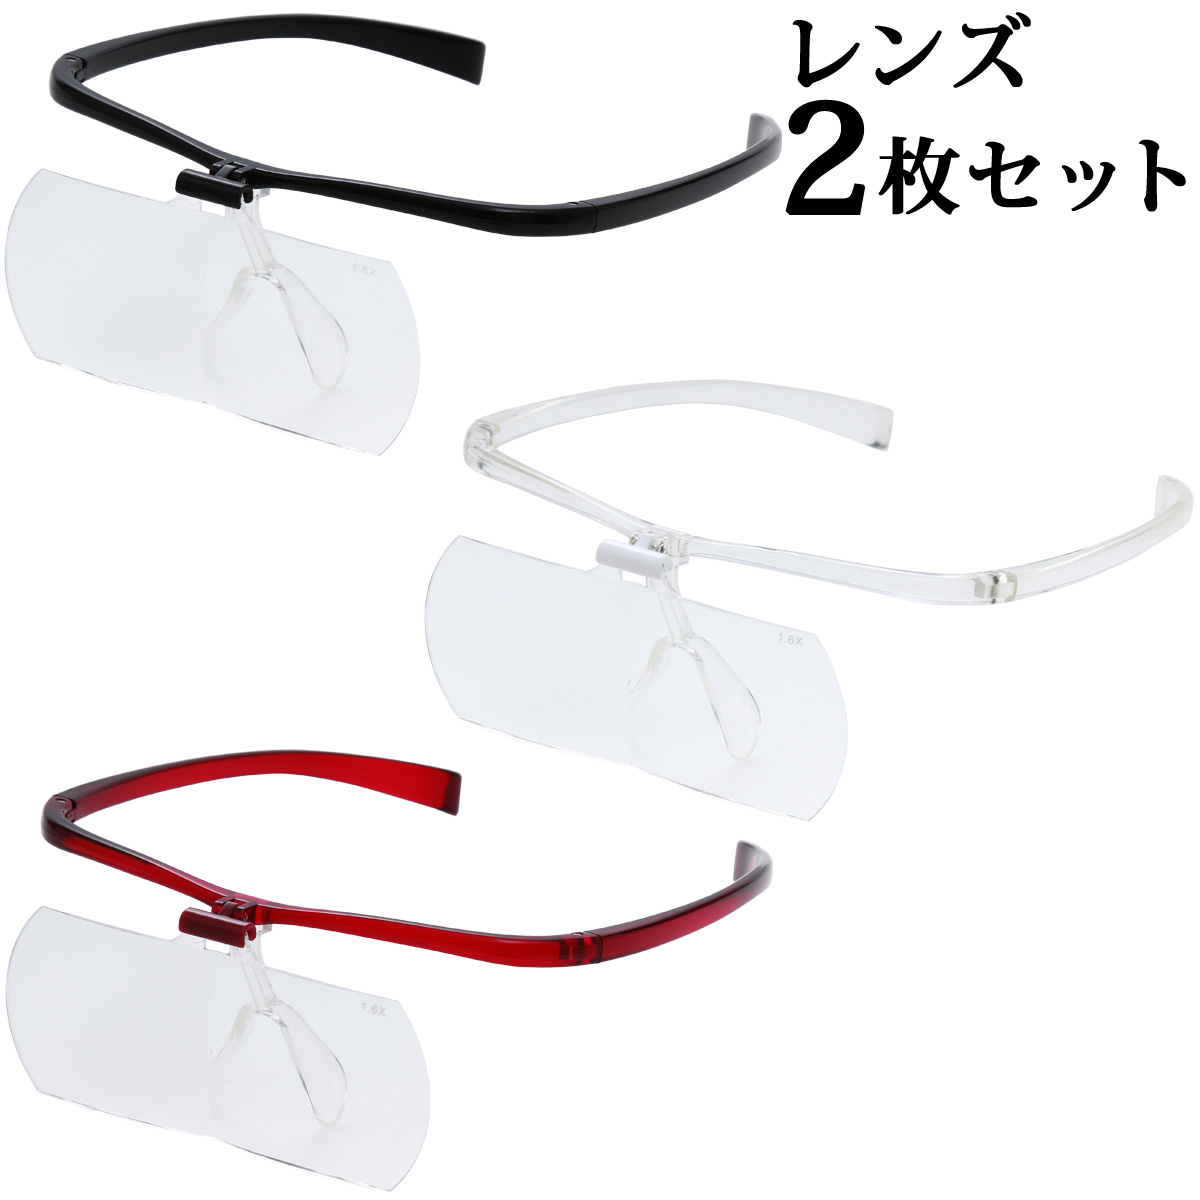 Binocular Glasses Magnifying Glasses Type 1.6times 2times Lens 2pcs Set HF - 60DE Clear Loupe Ikeda Lens from the Top of Spectacular Glasses